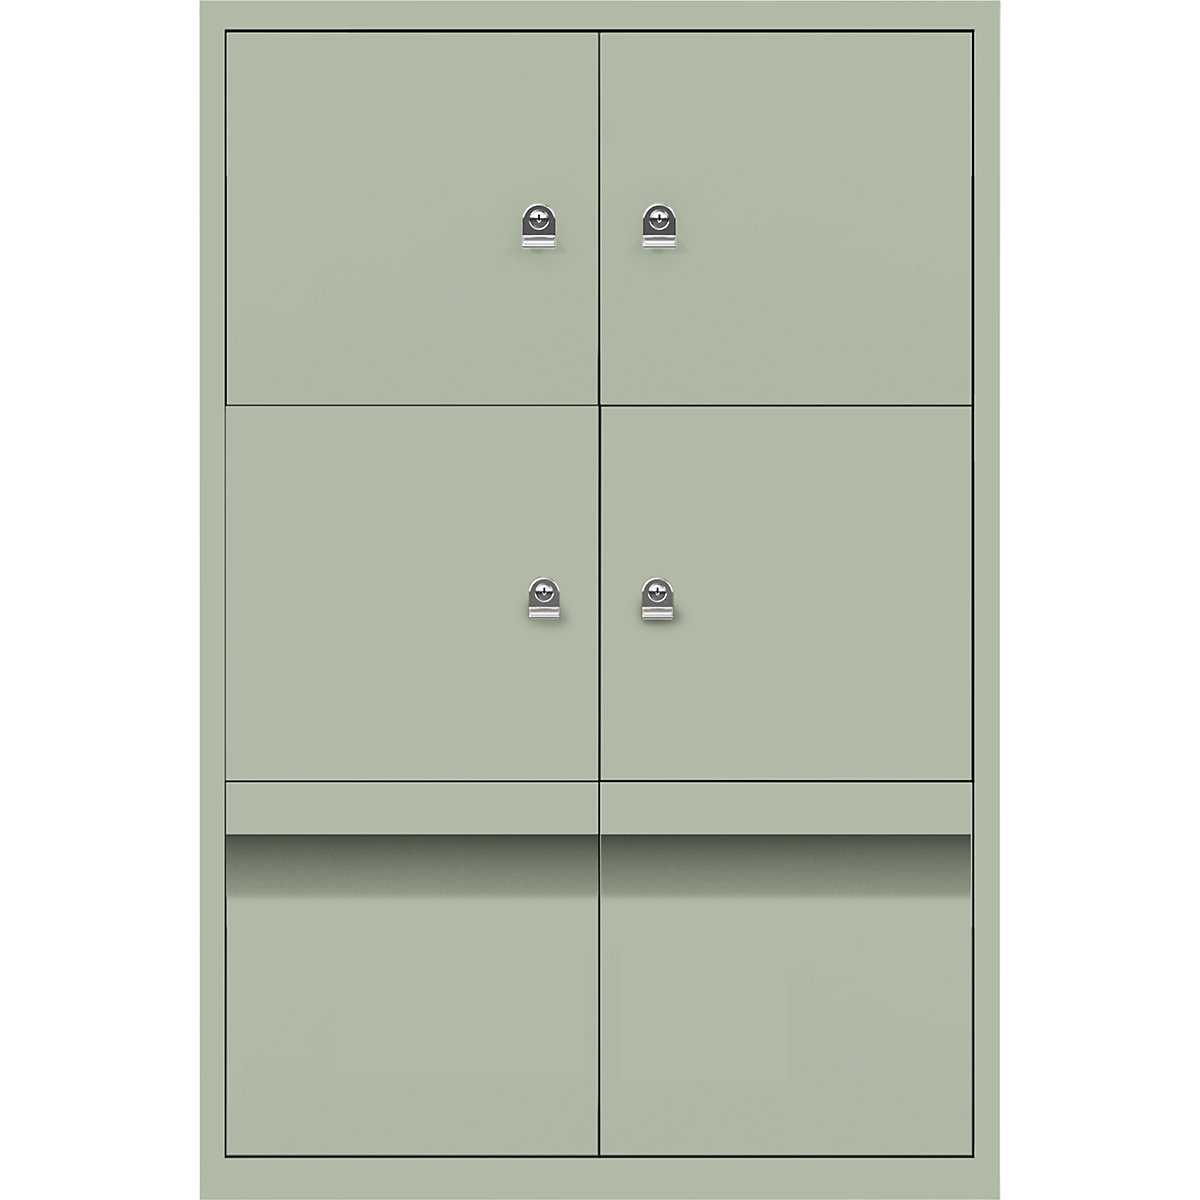 LateralFile™ lodge – BISLEY, with 4 lockable compartments and 2 drawers, height 375 mm each, regent-19